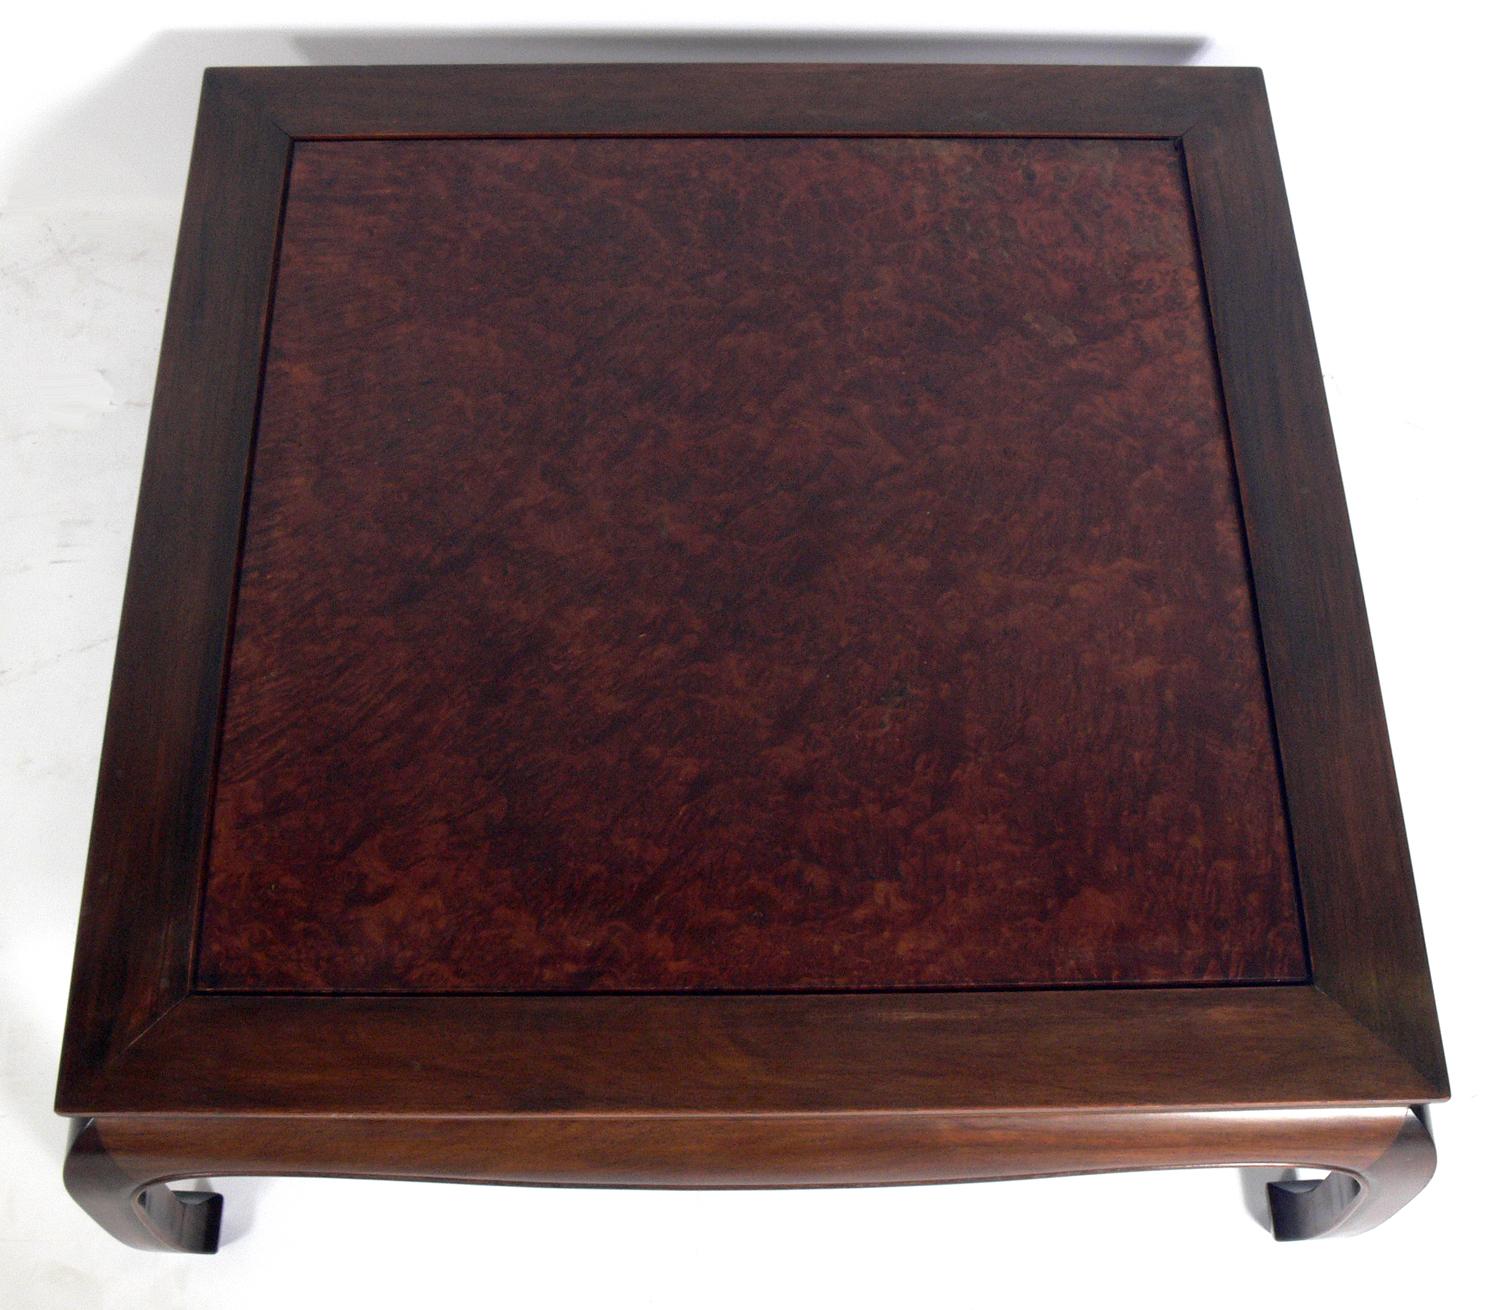 Midcentury Asian coffee table, Asian, circa 1950s. Beautiful graining to the wood.